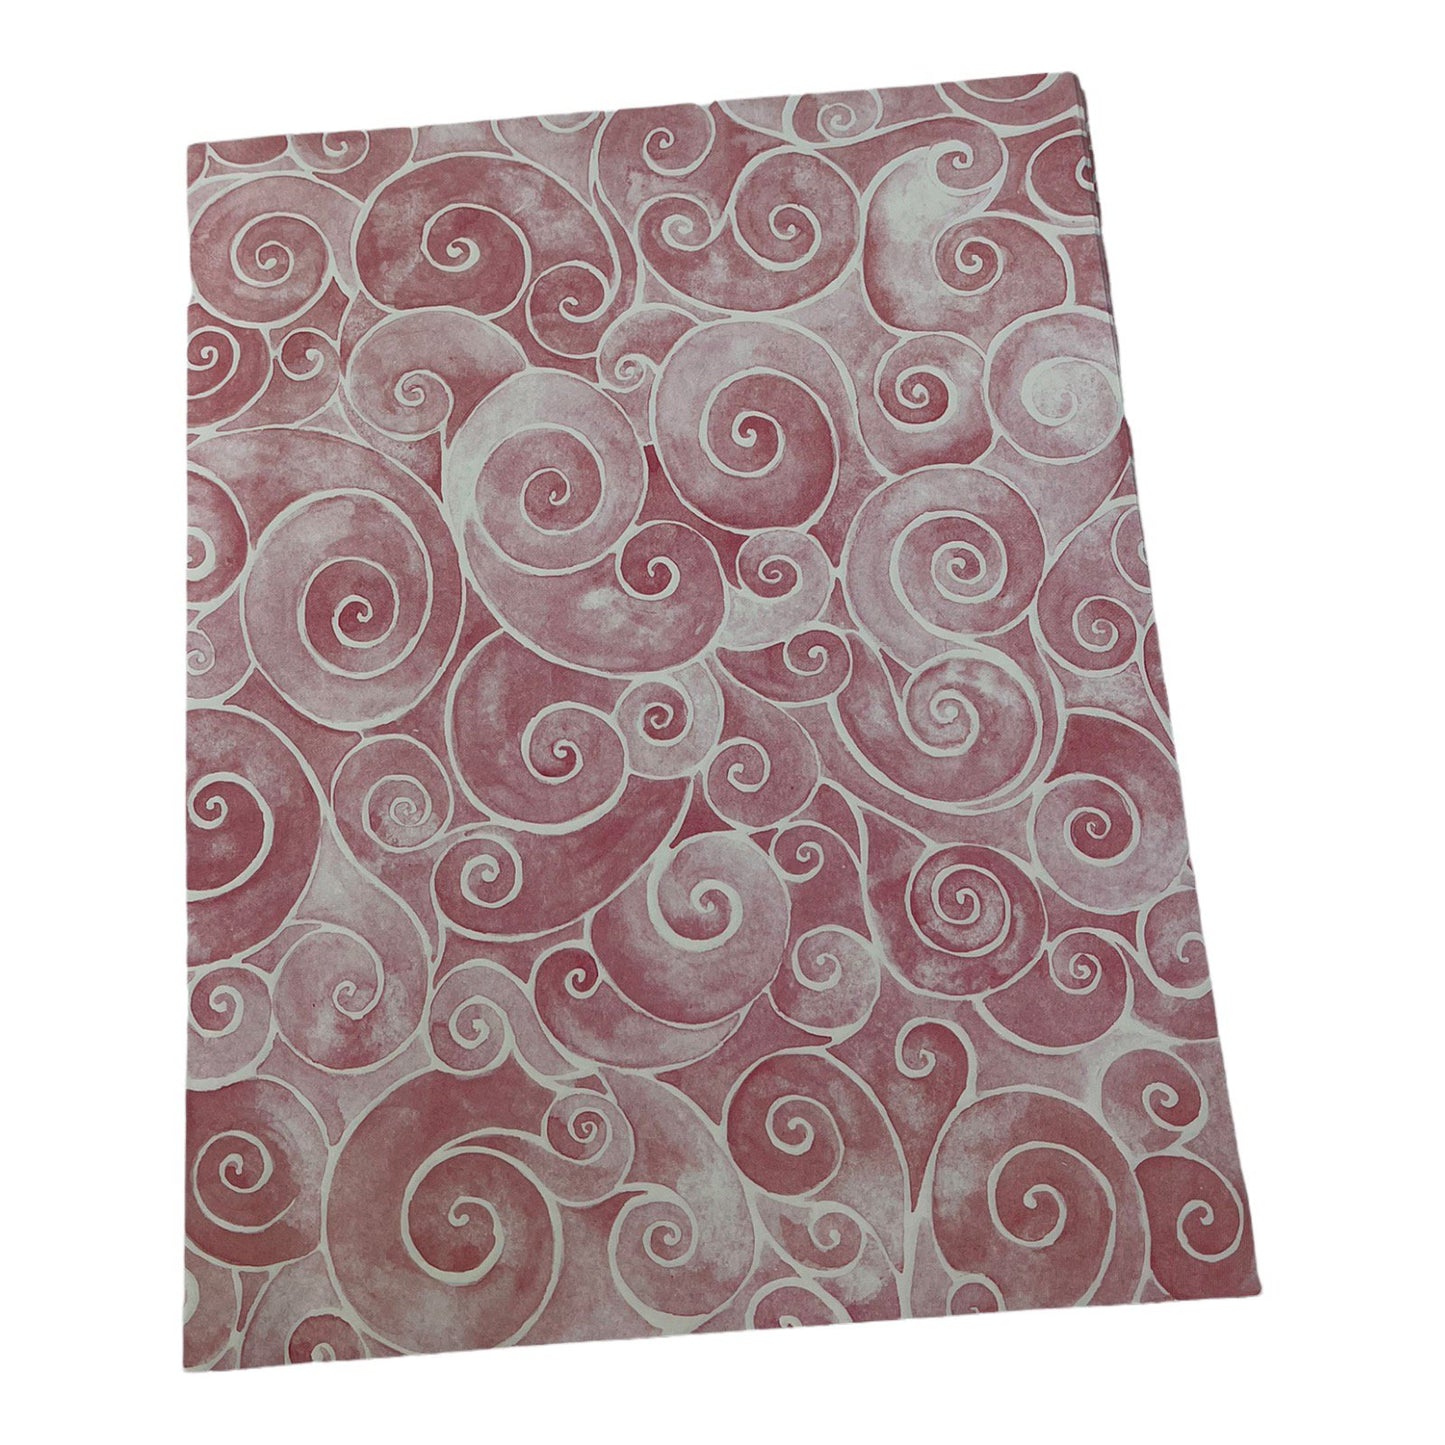 (70) Decorative 8.5" X 11" Printing Papers Pink and Blue Swirls